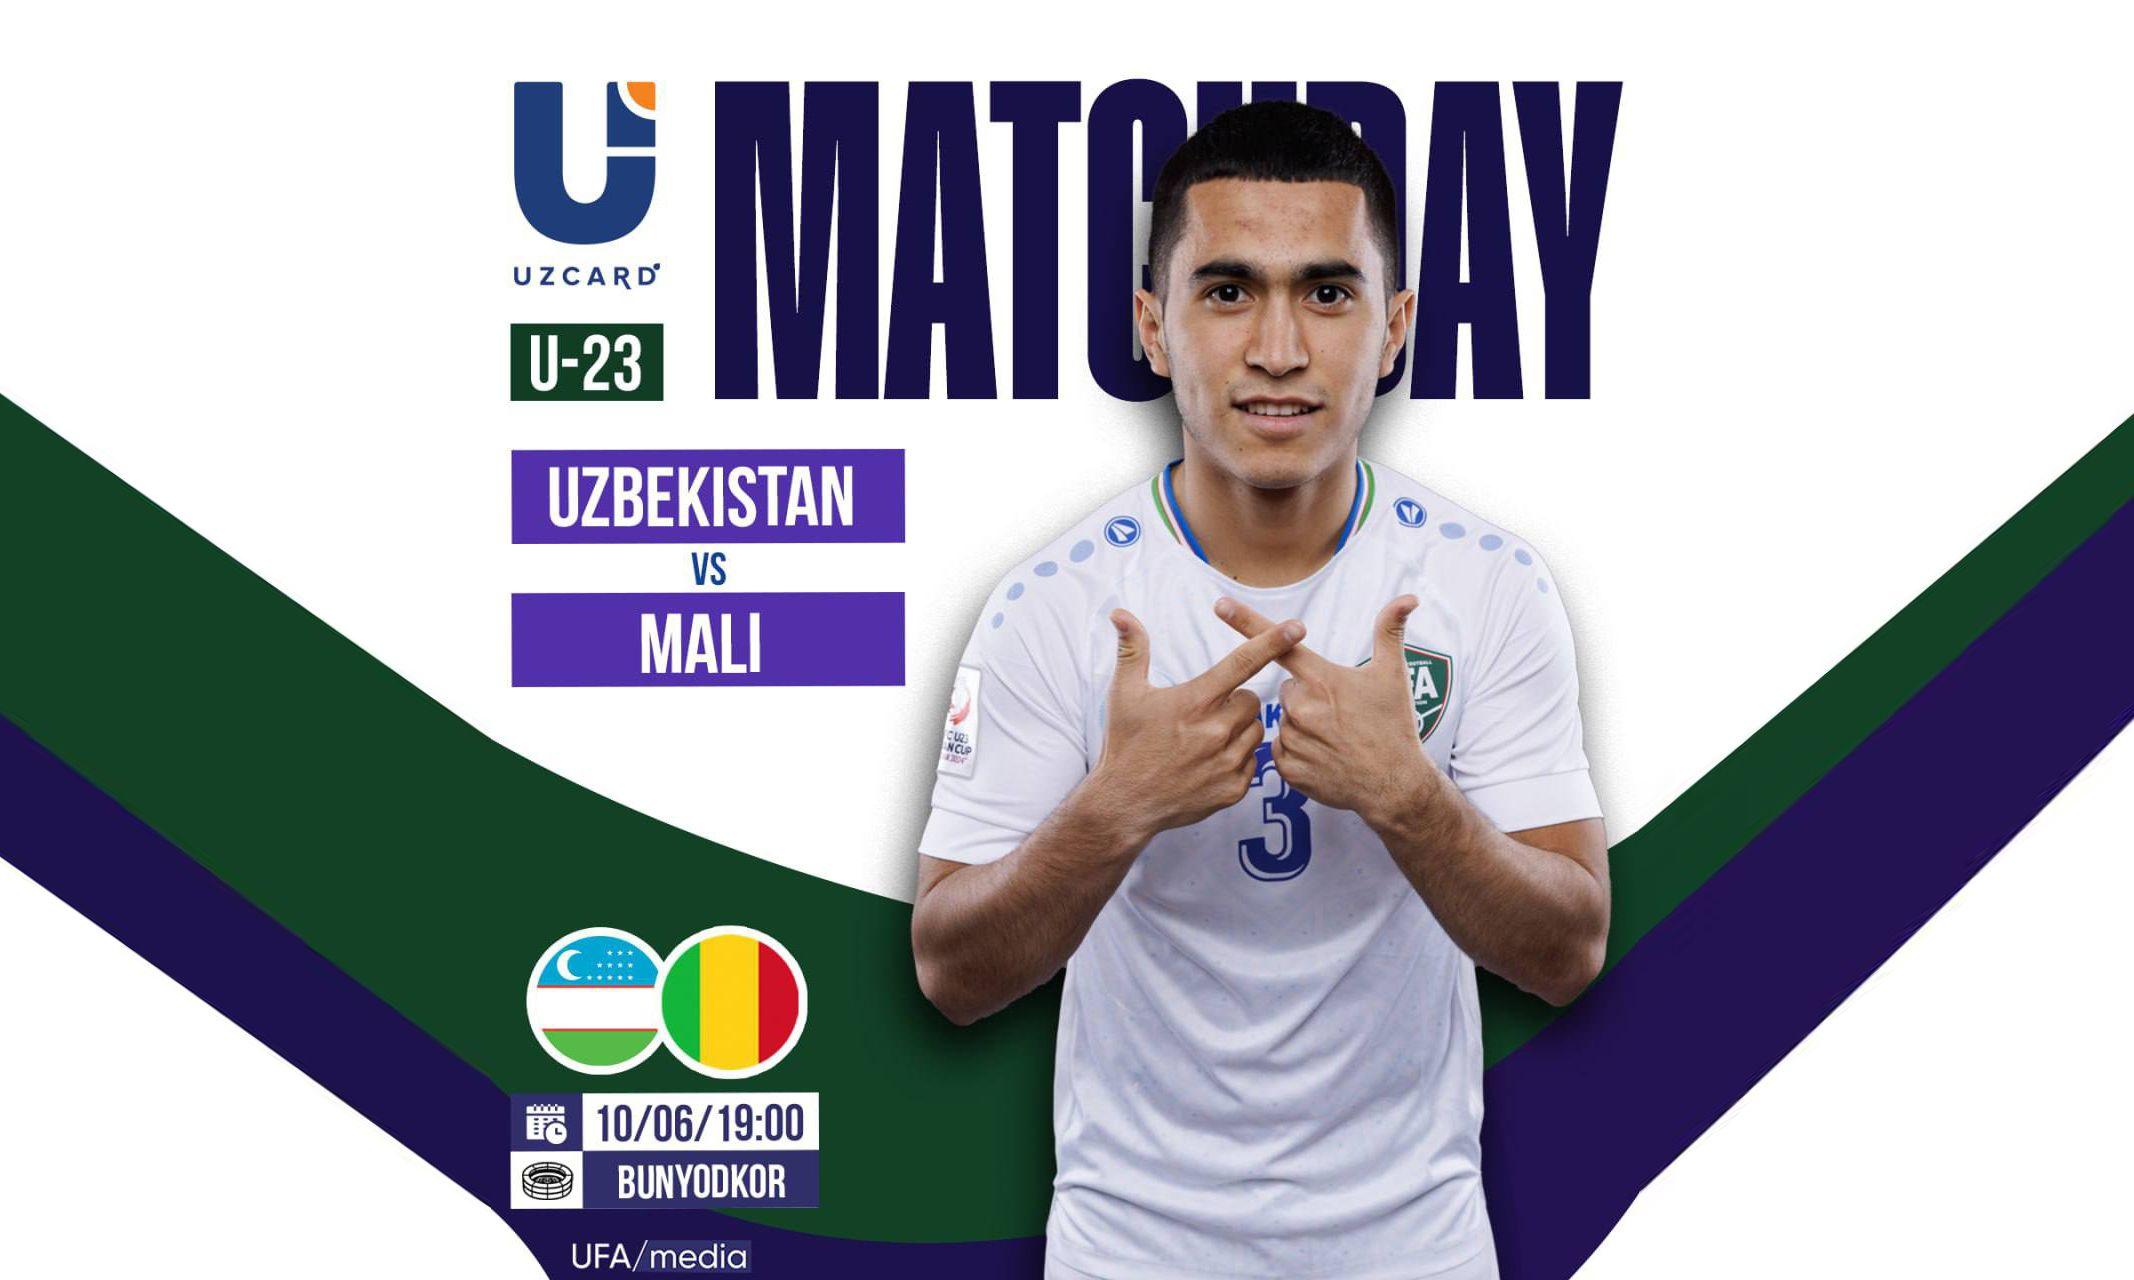 Uzbekistan and Mali's Olympic football teams will take the field again in a friendly match